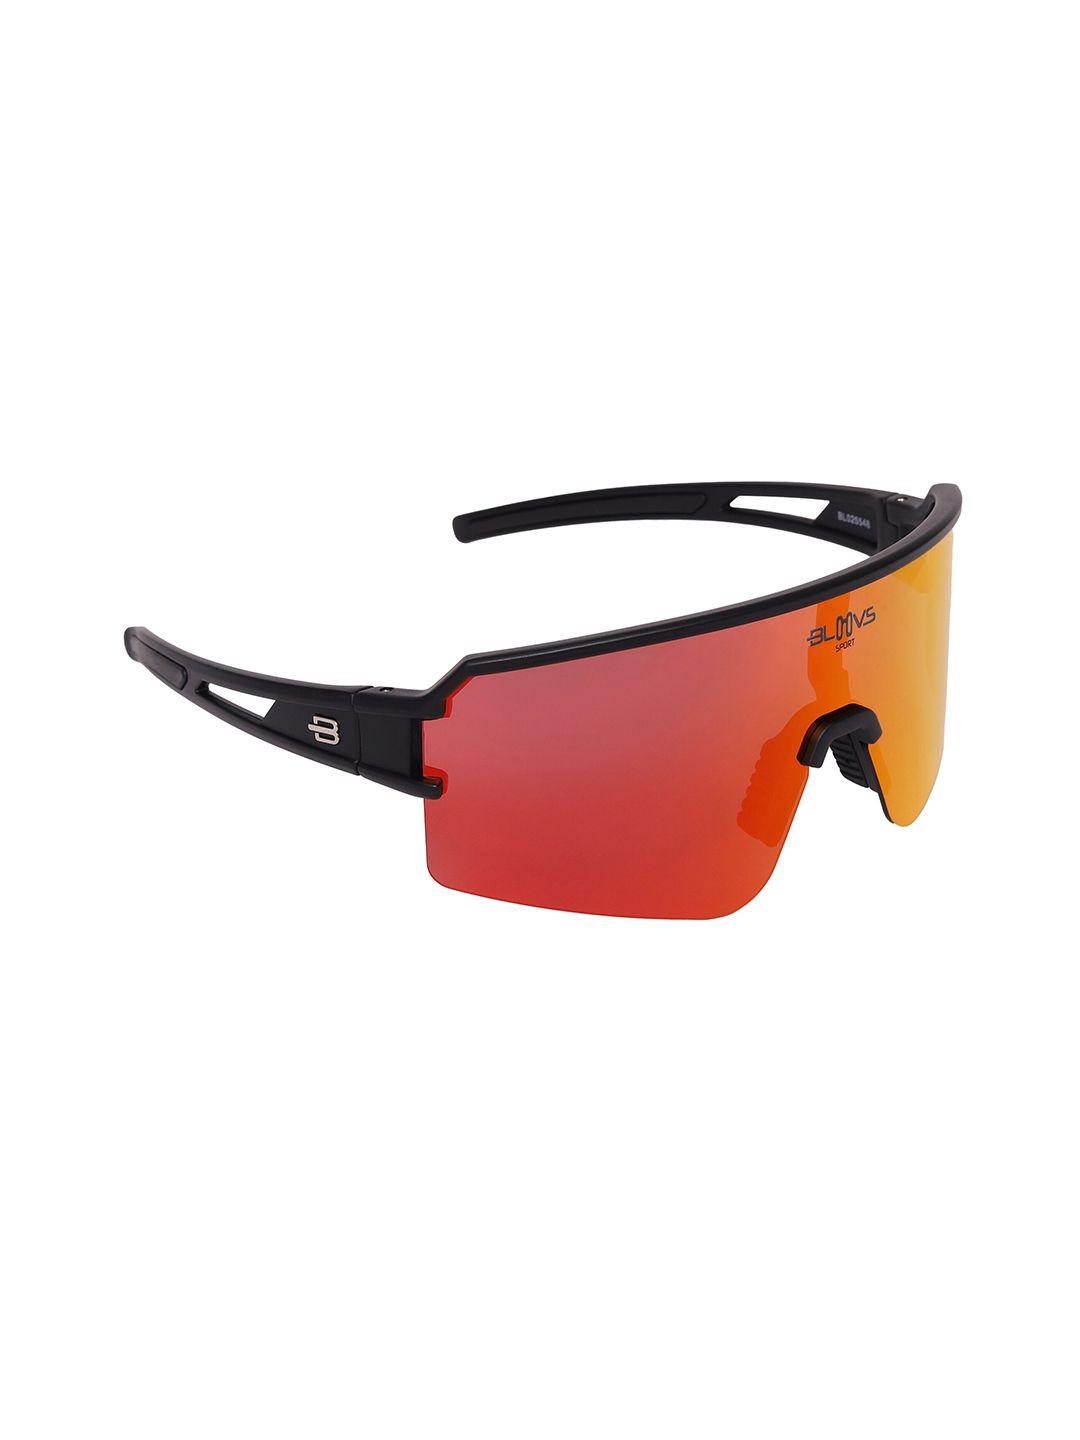 bloovs-sports-sports-sunglasses-polarised-and-uv-protected-lens-flandes-matte-black-red